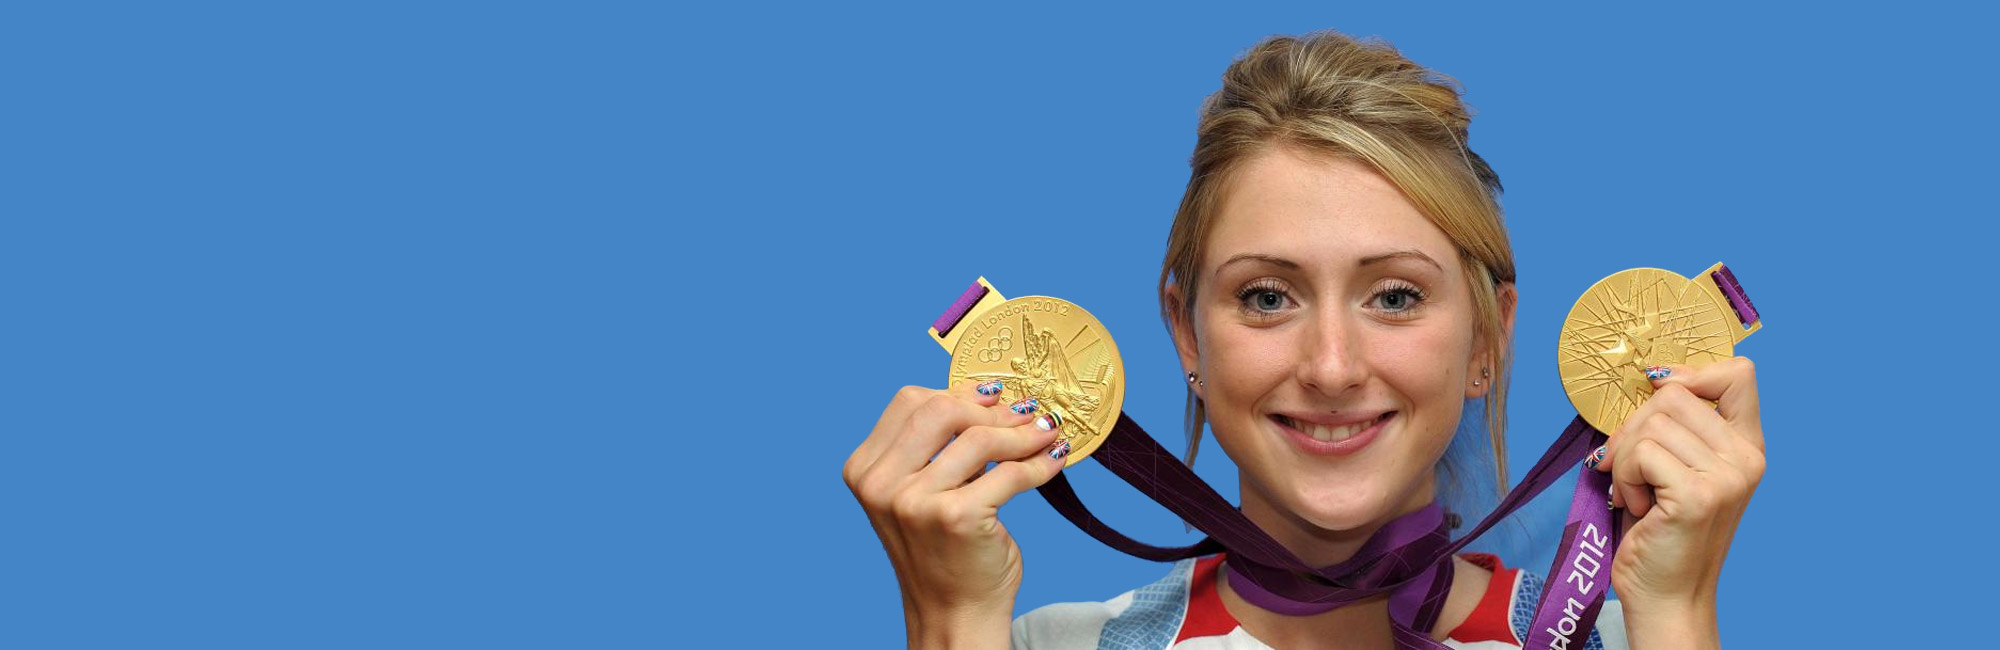 Olympic cycling champion Laura Kenny joins Active Uprising